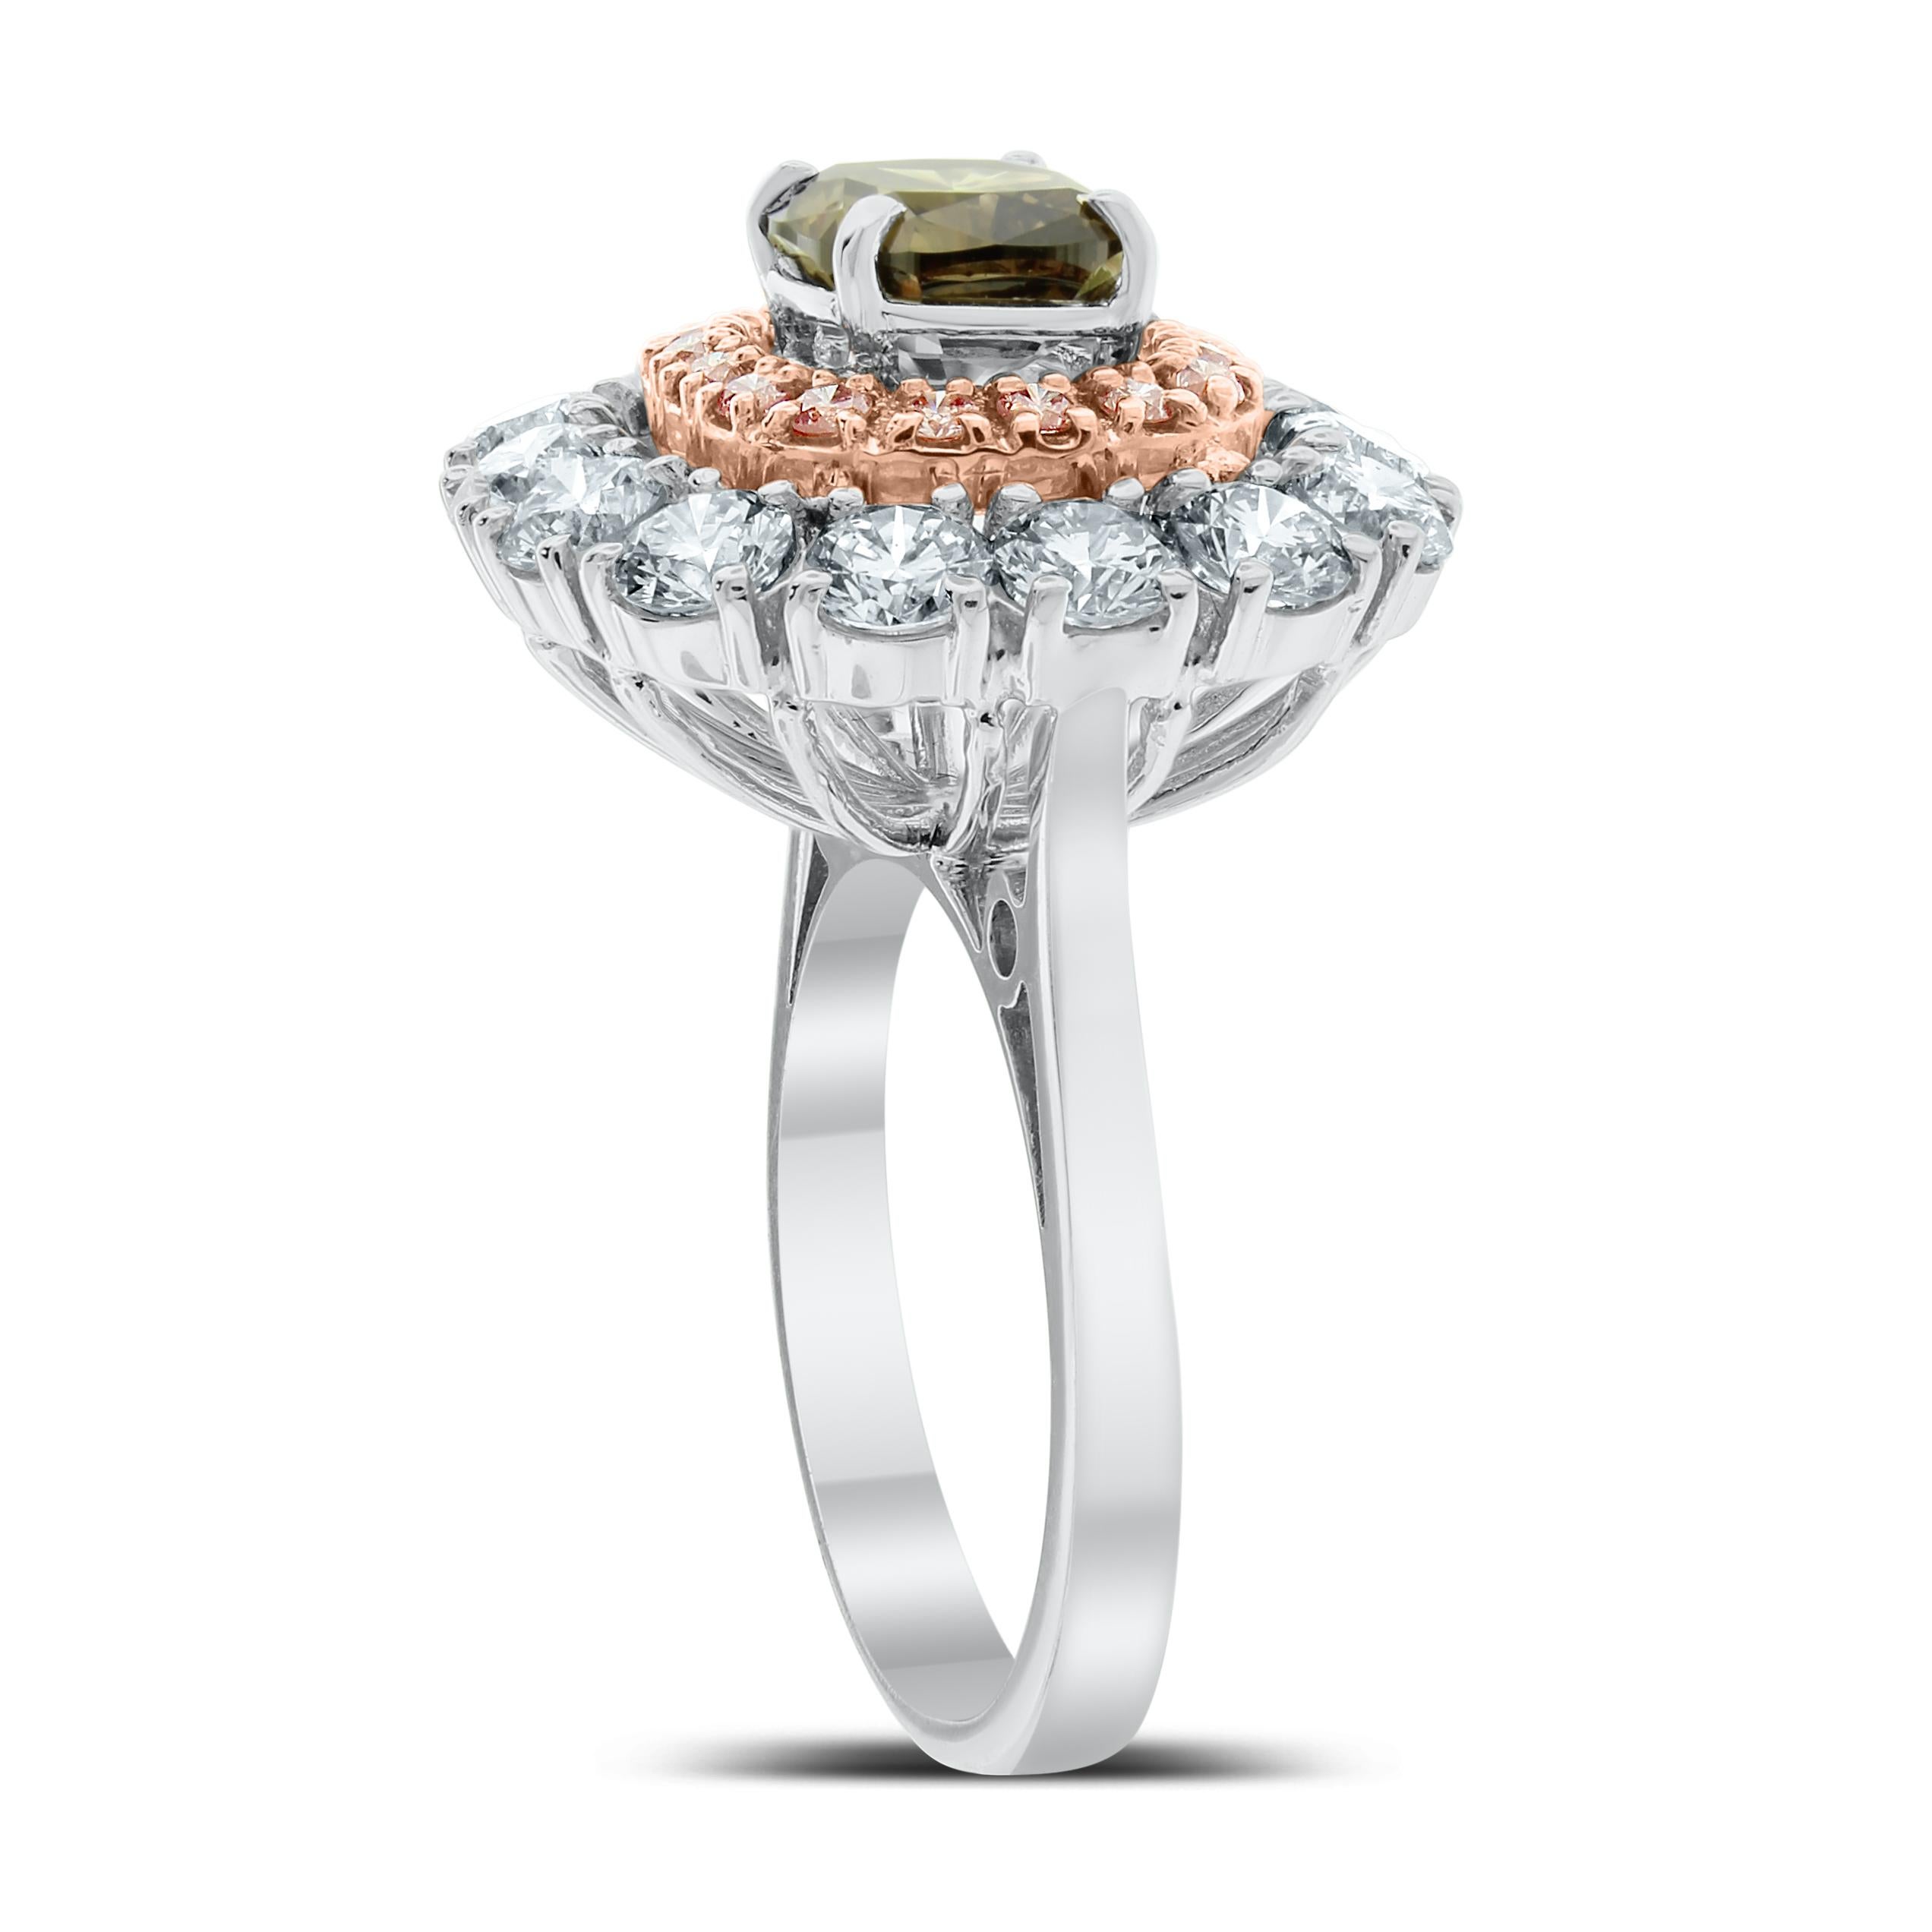 Women's or Men's Beauvince Chocolate Diamond Cocktail Ring '3.89 Ct Diamonds' in Gold For Sale